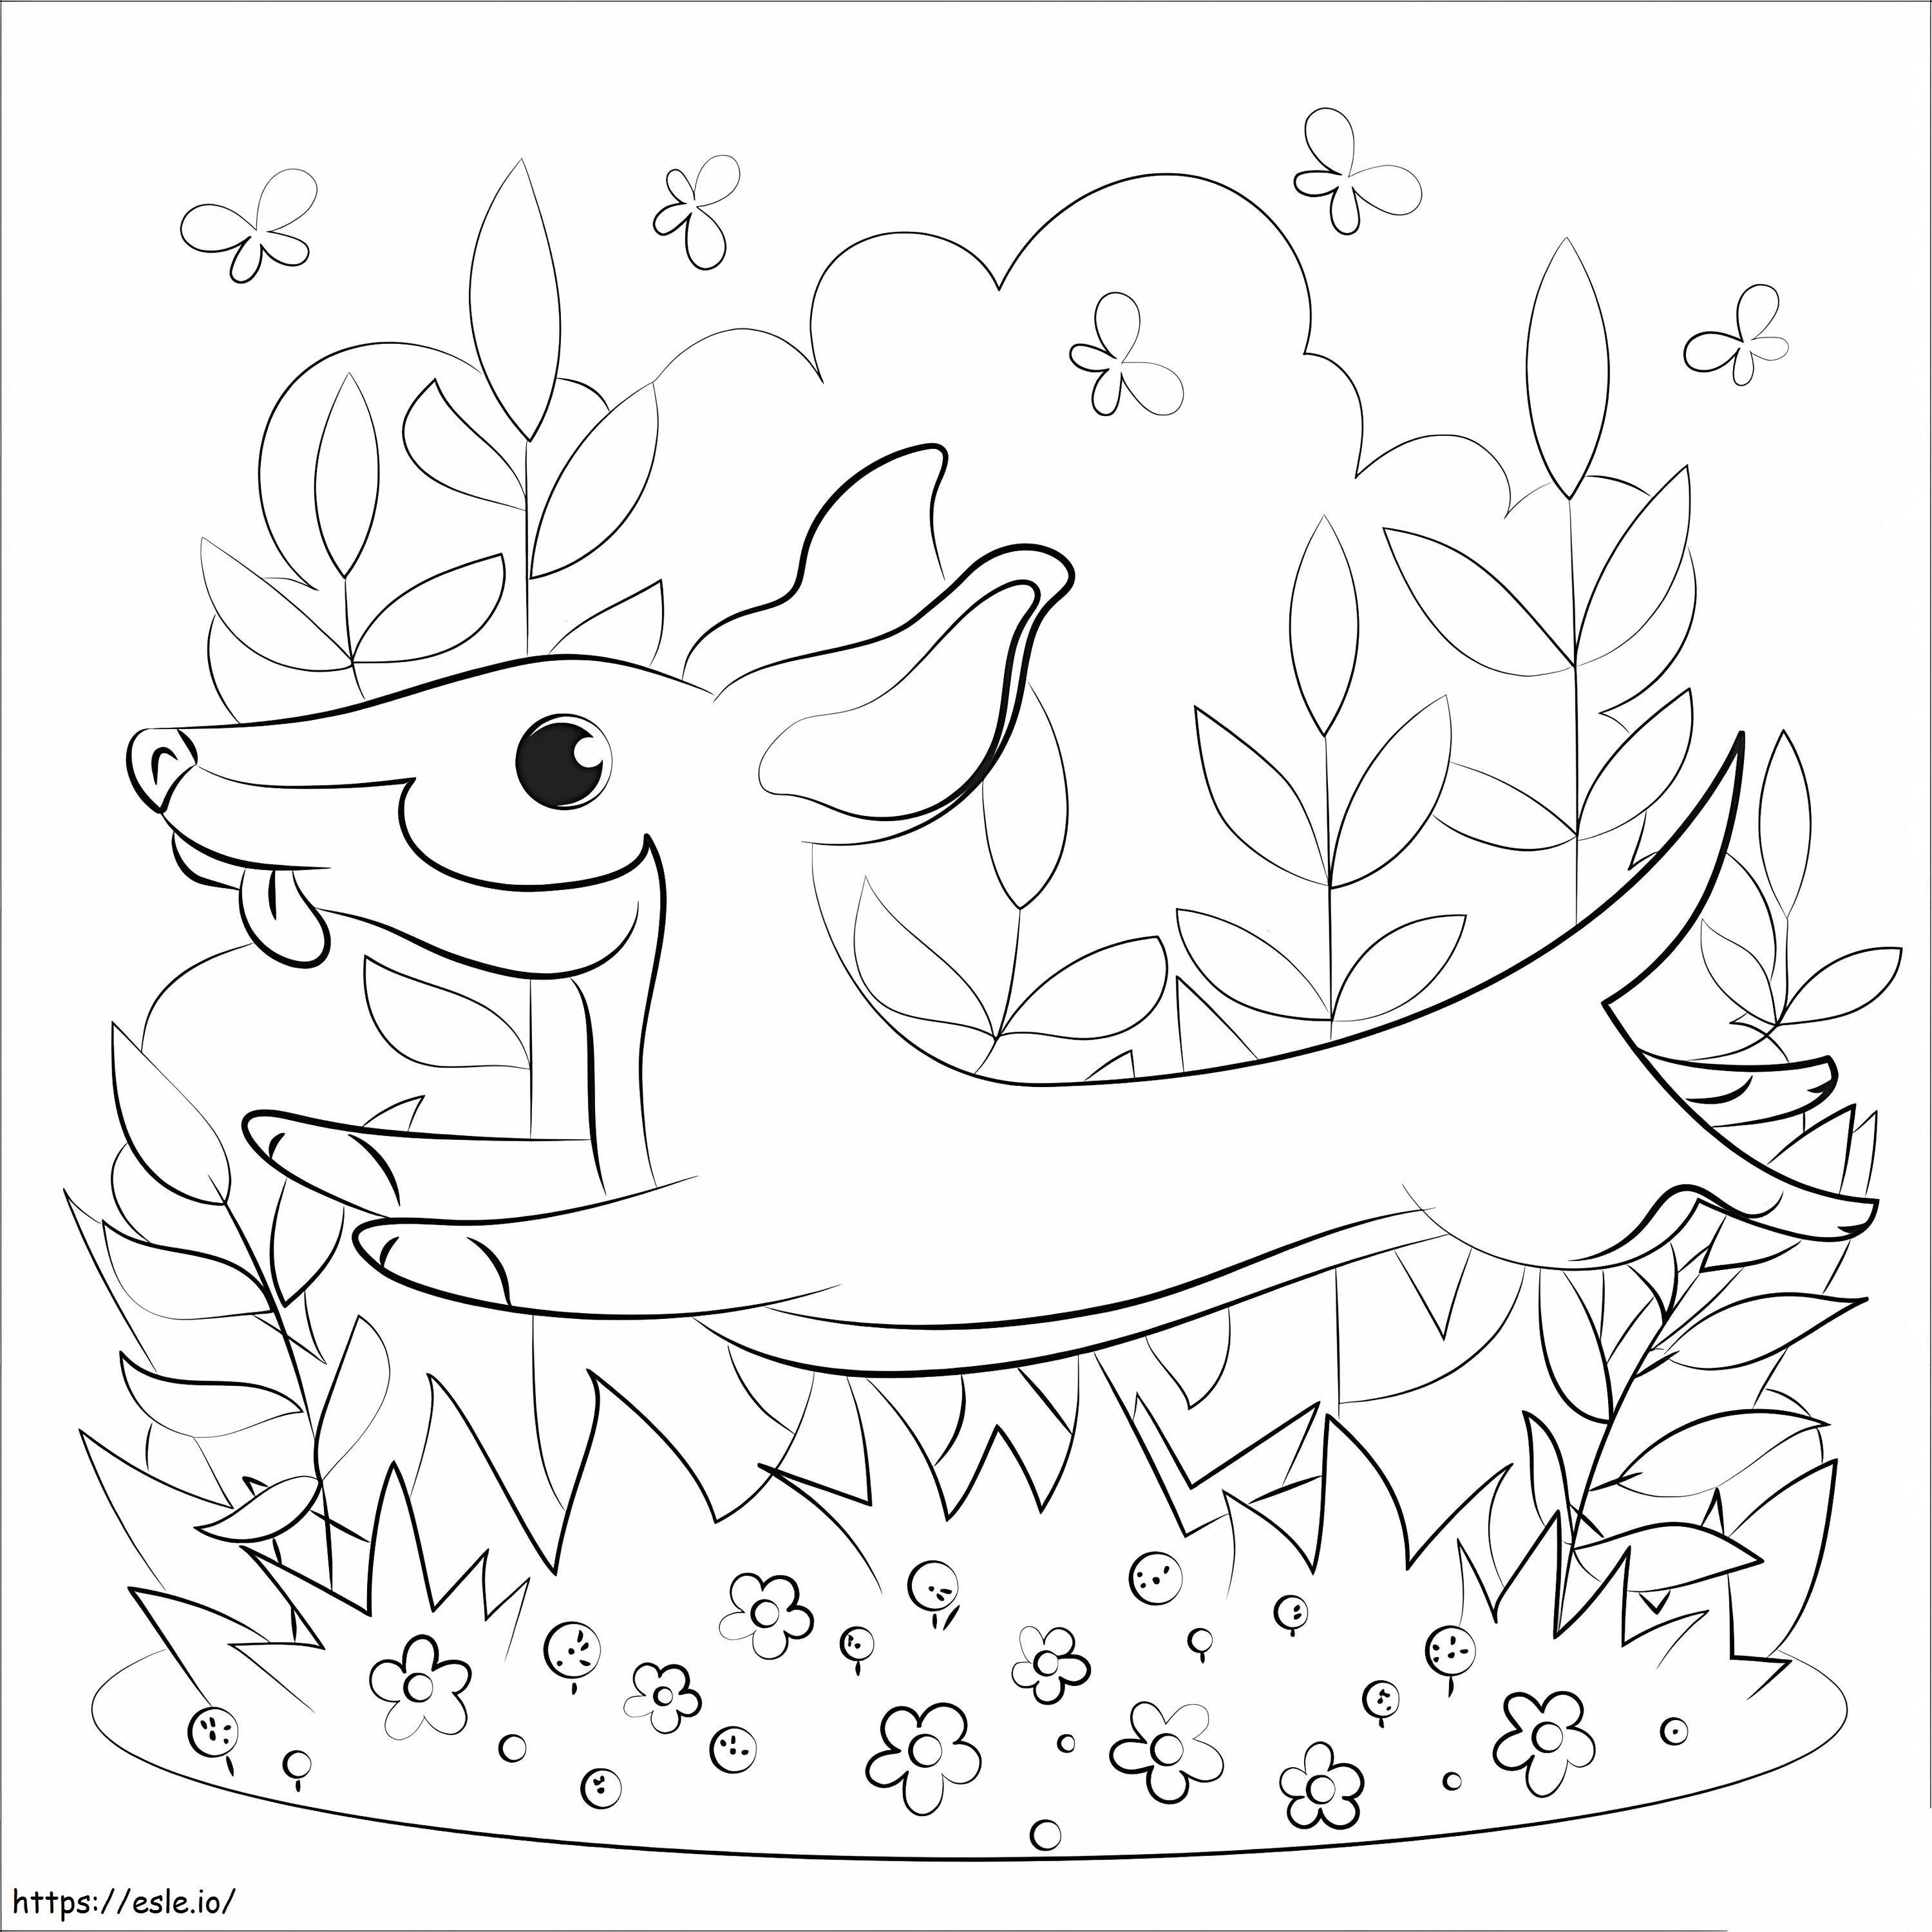 Adorable Dachshund coloring page